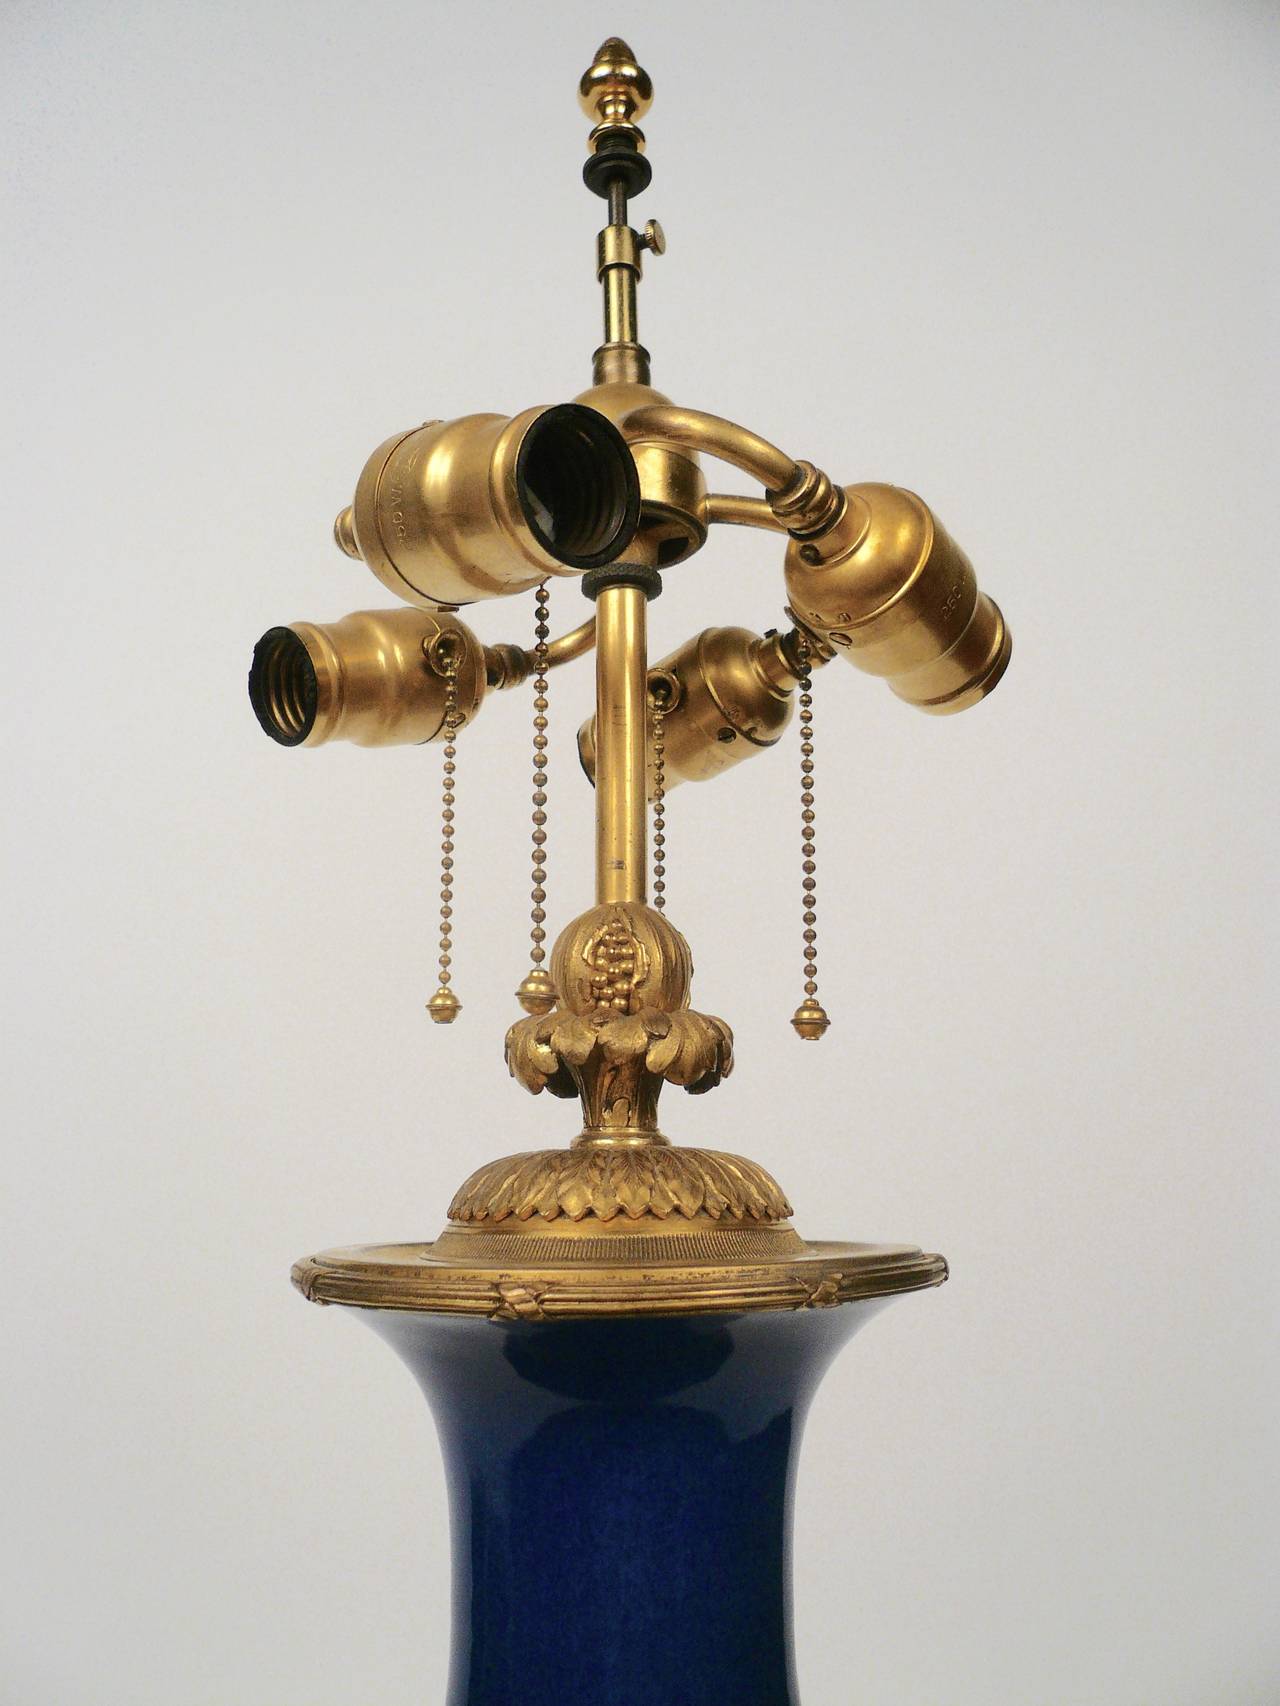 American Blue Porcelain and Ormolu Table Lamp by E.F. Caldwell